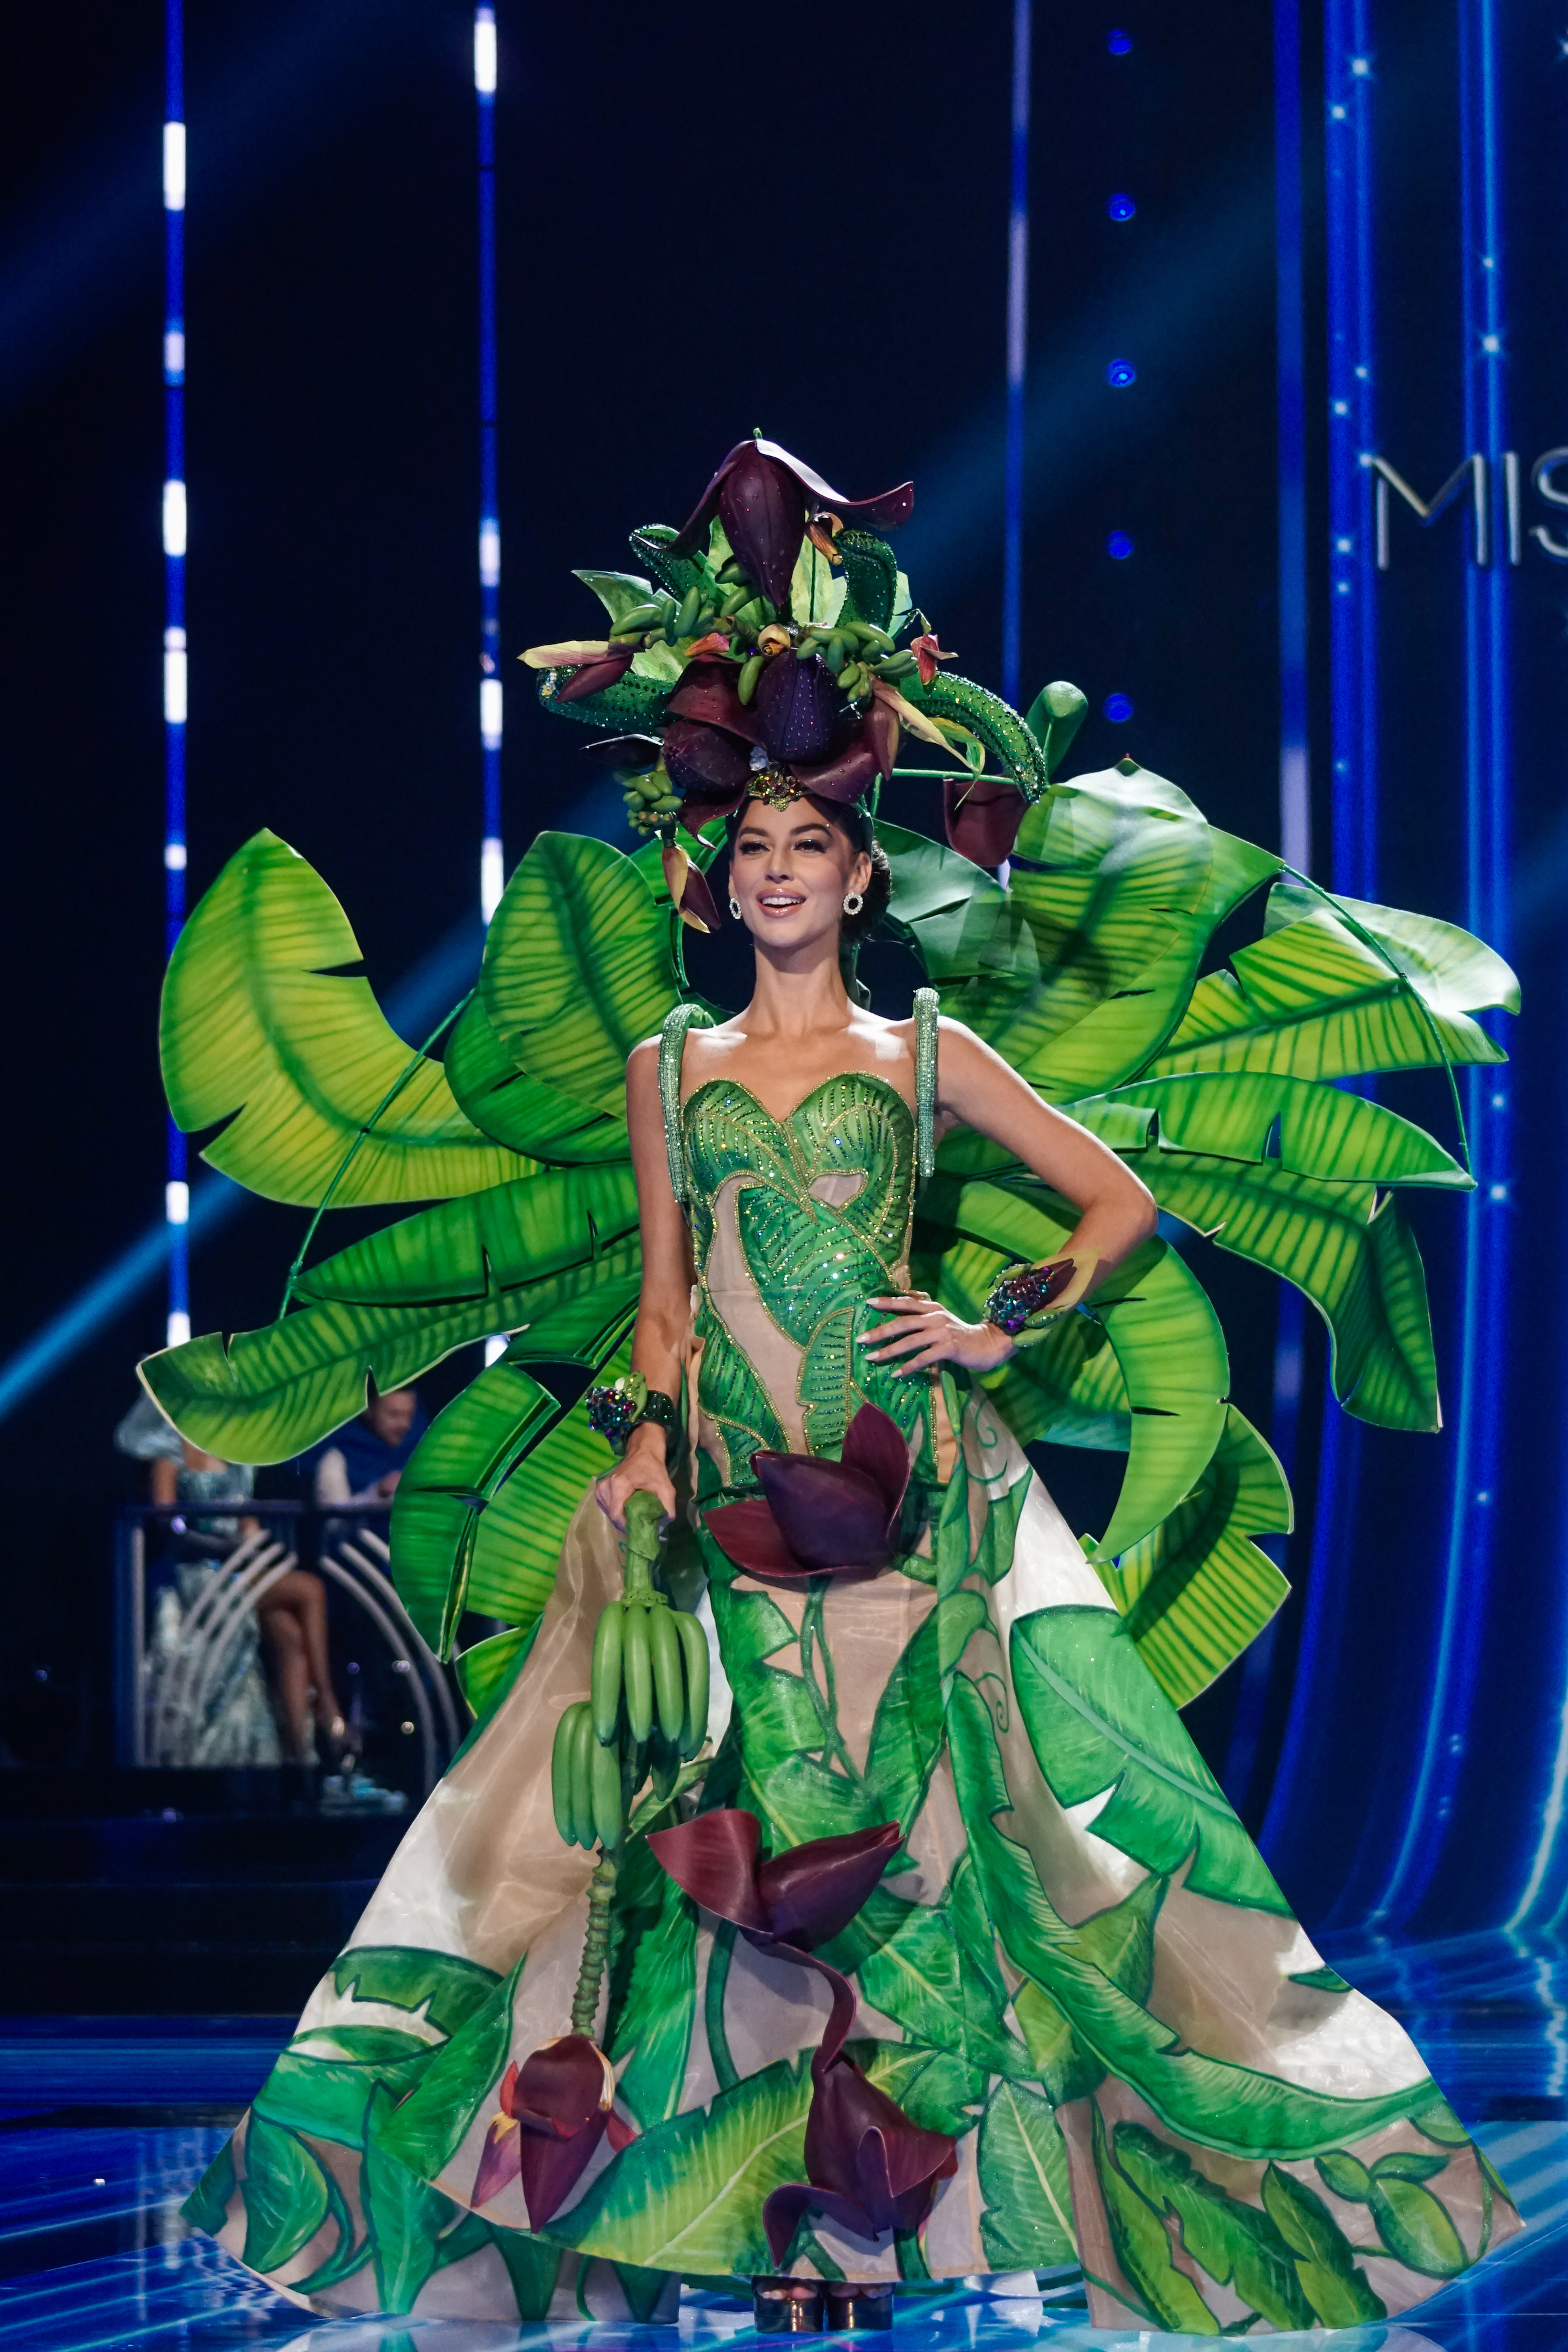 SAN SALVADOR, EL SALVADOR - NOVEMBER 16: Miss Dominican Republic Mariana Downing during the 72nd Miss Universe Competition National Costume Show on November 16, 2023 in San Salvador, El Salvador. (Photo by Alex Peña/Getty Images)